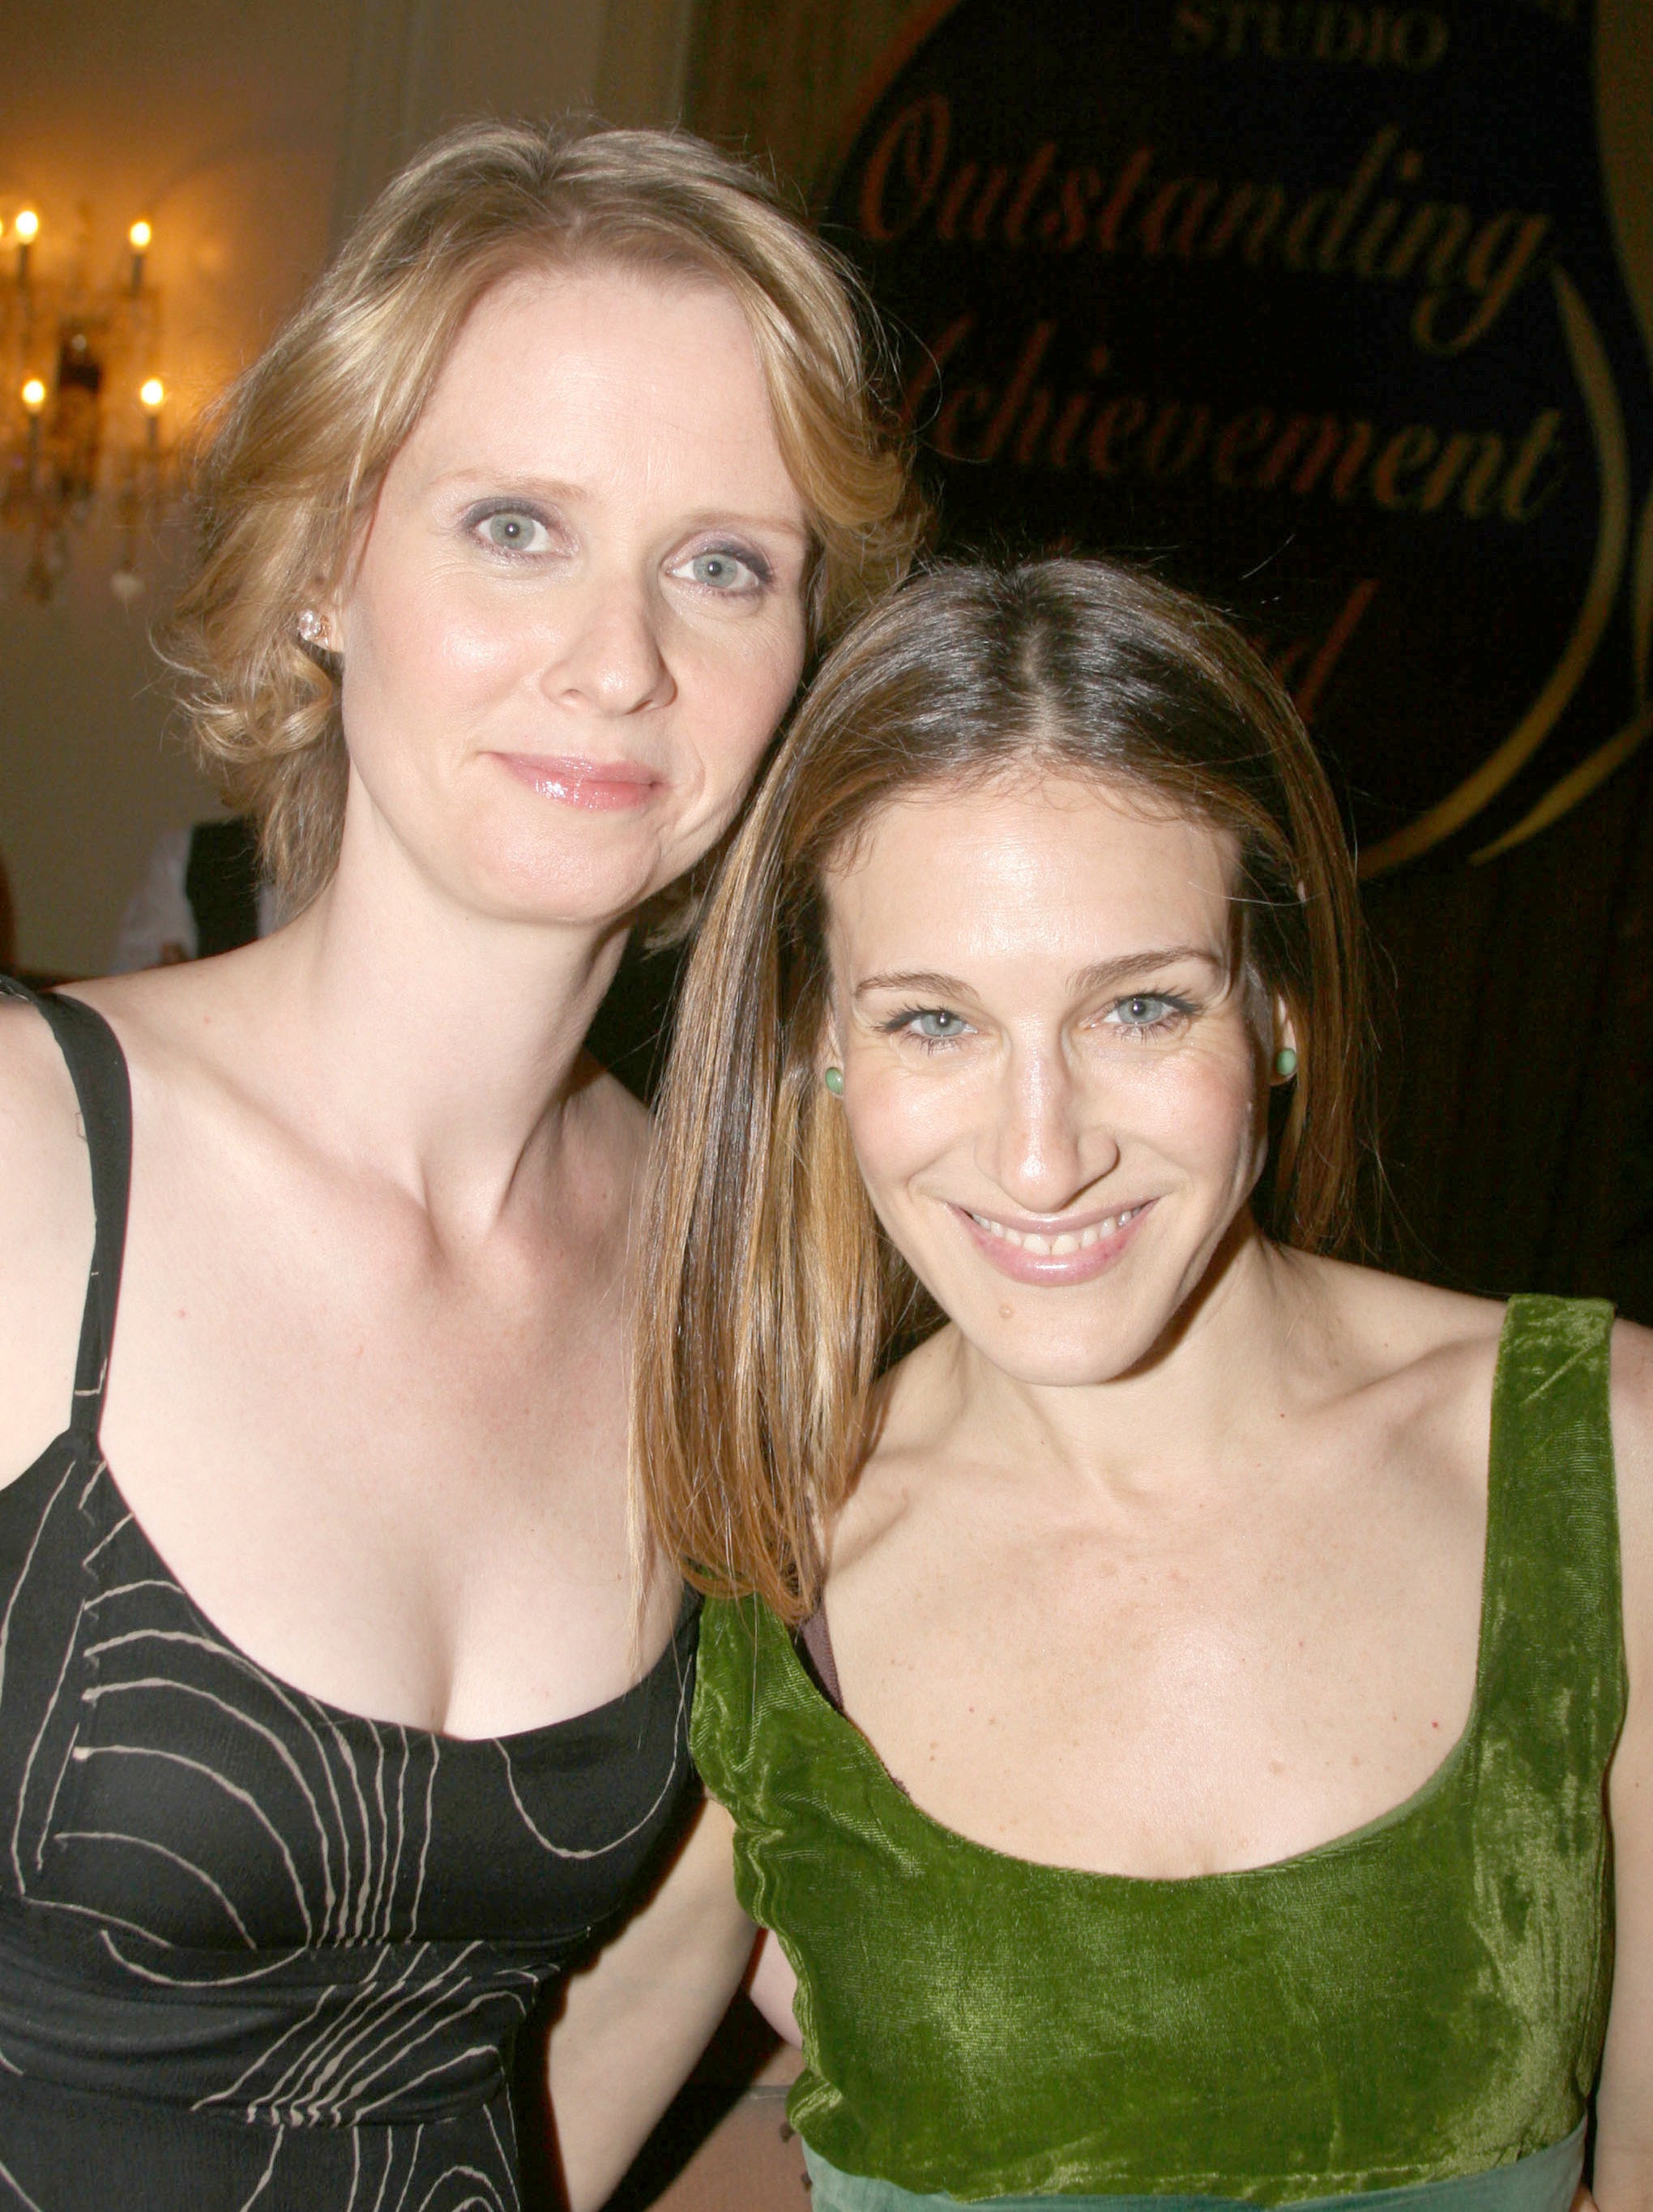 Close-up of Cynthia and SJP standing together arm in arm